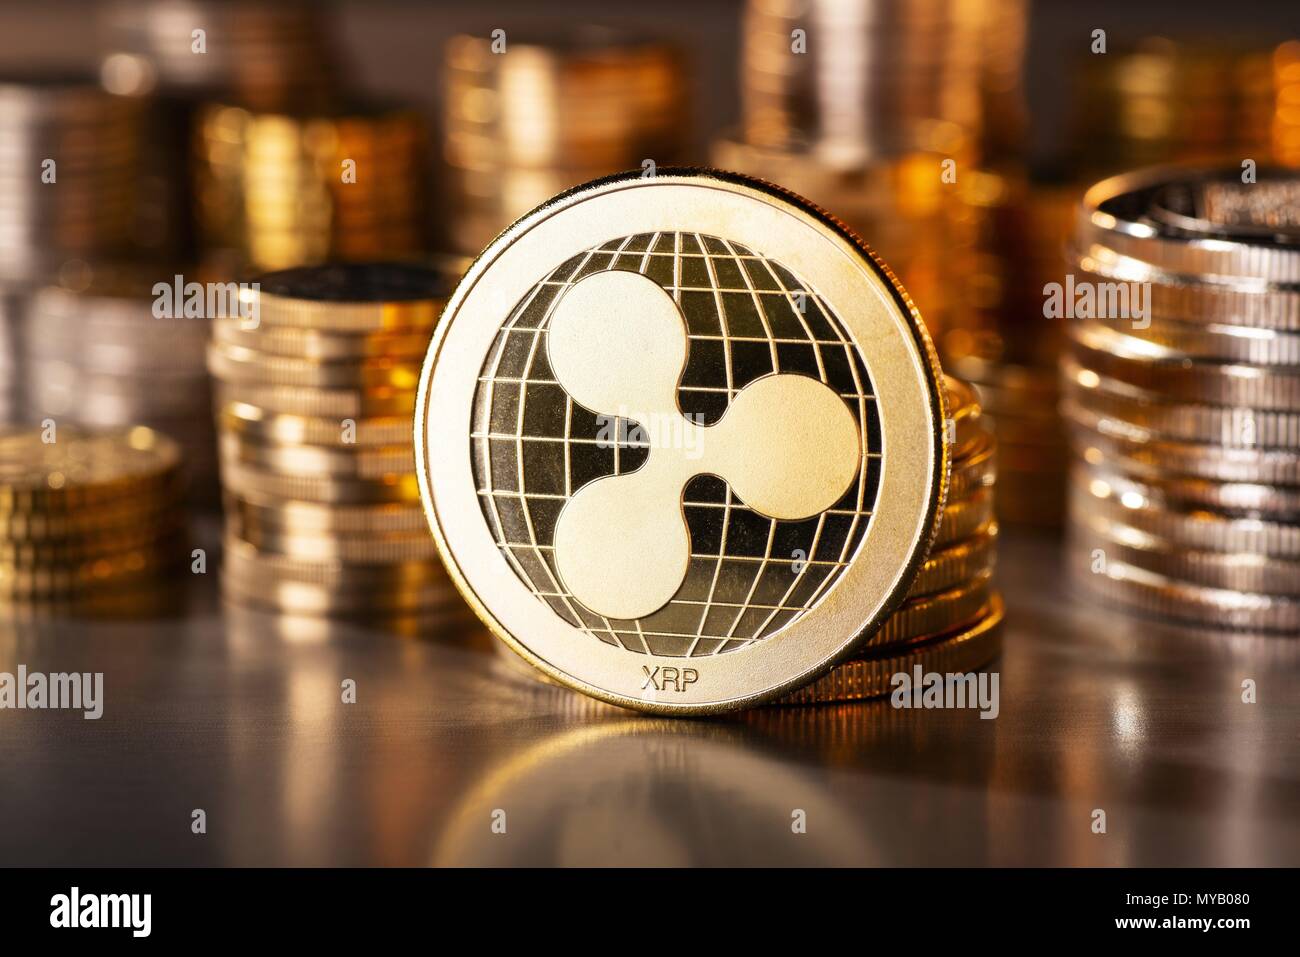 Crypto currency coin ripple with several stacks of coins in the background | usage worldwide Stock Photo